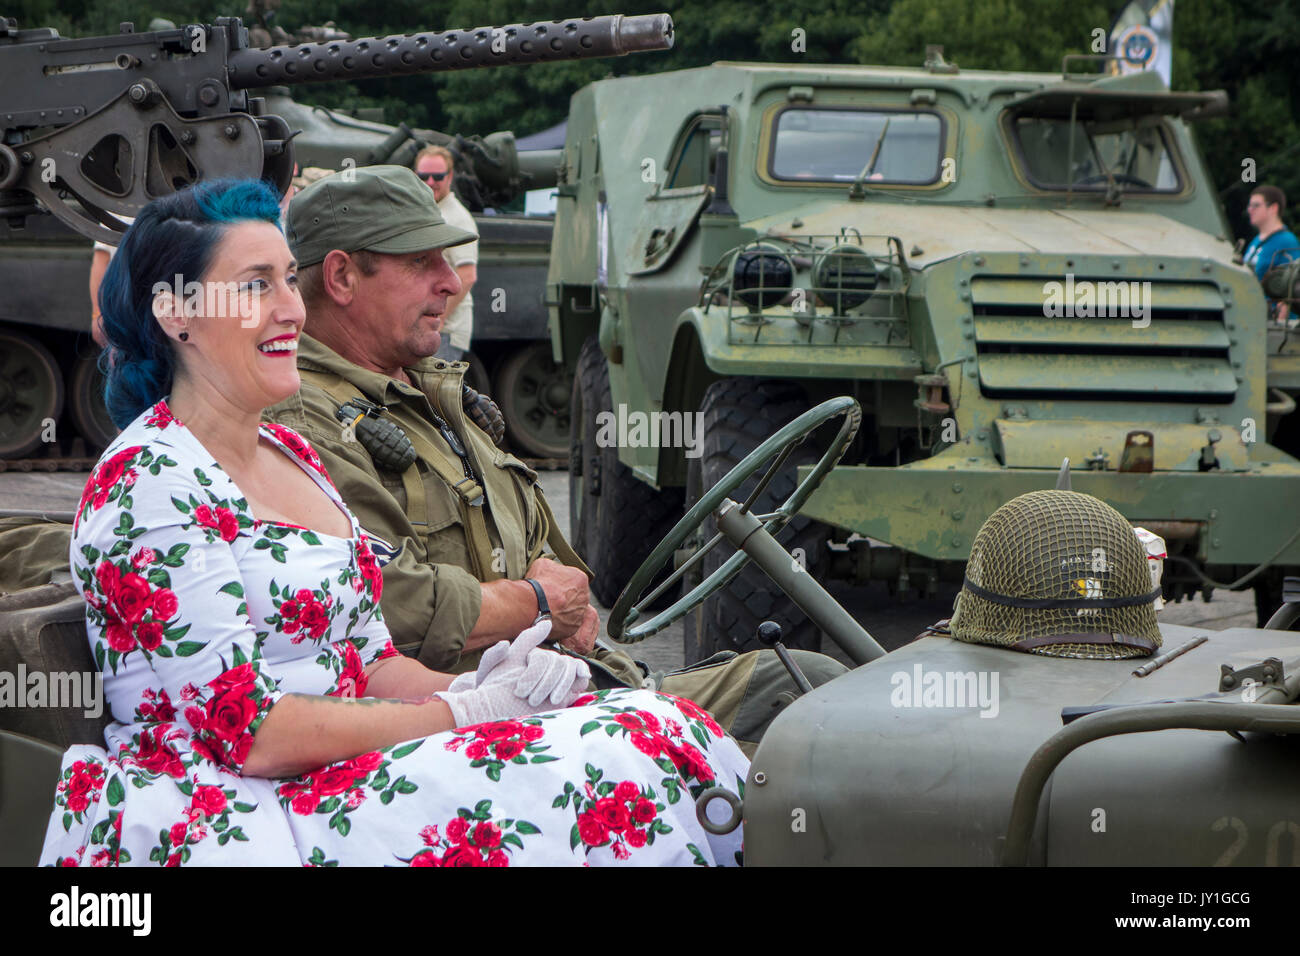 Reenactors dressed as WW2 US soldier and woman in 1940s dress posing in WWII military Willys MB jeep during World War Two militaria fair Stock Photo